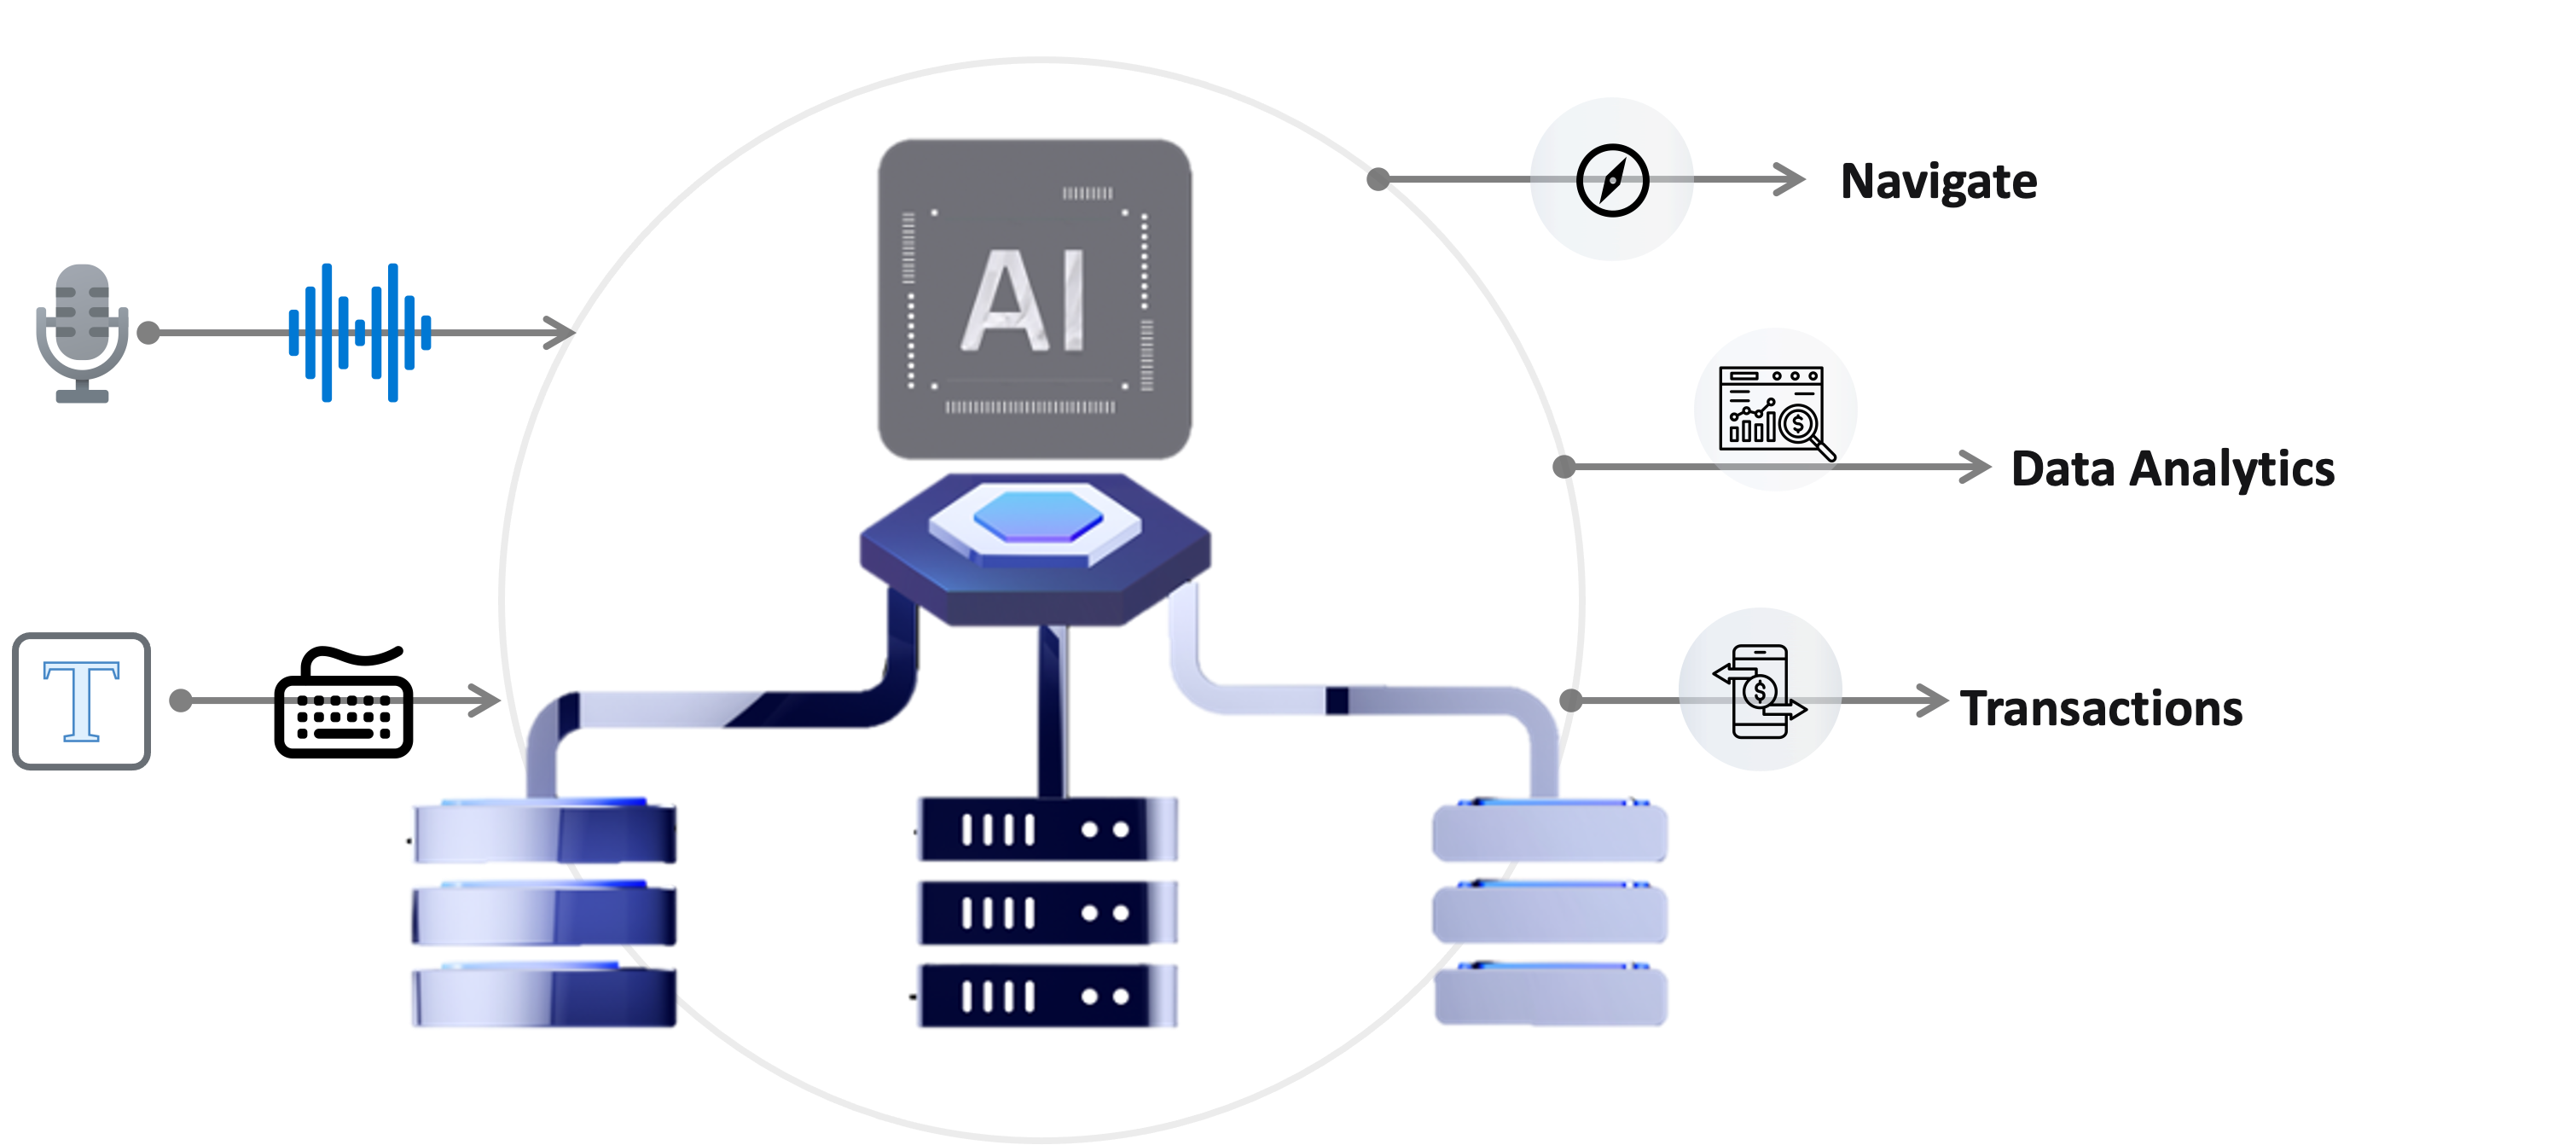 AI Engine in the center, a chip with AI written on it under a hexagonal platform. To the left is a microphone and type symbol for inputs. The right shows arrows coming out with the labels navigate, data, and transactions.